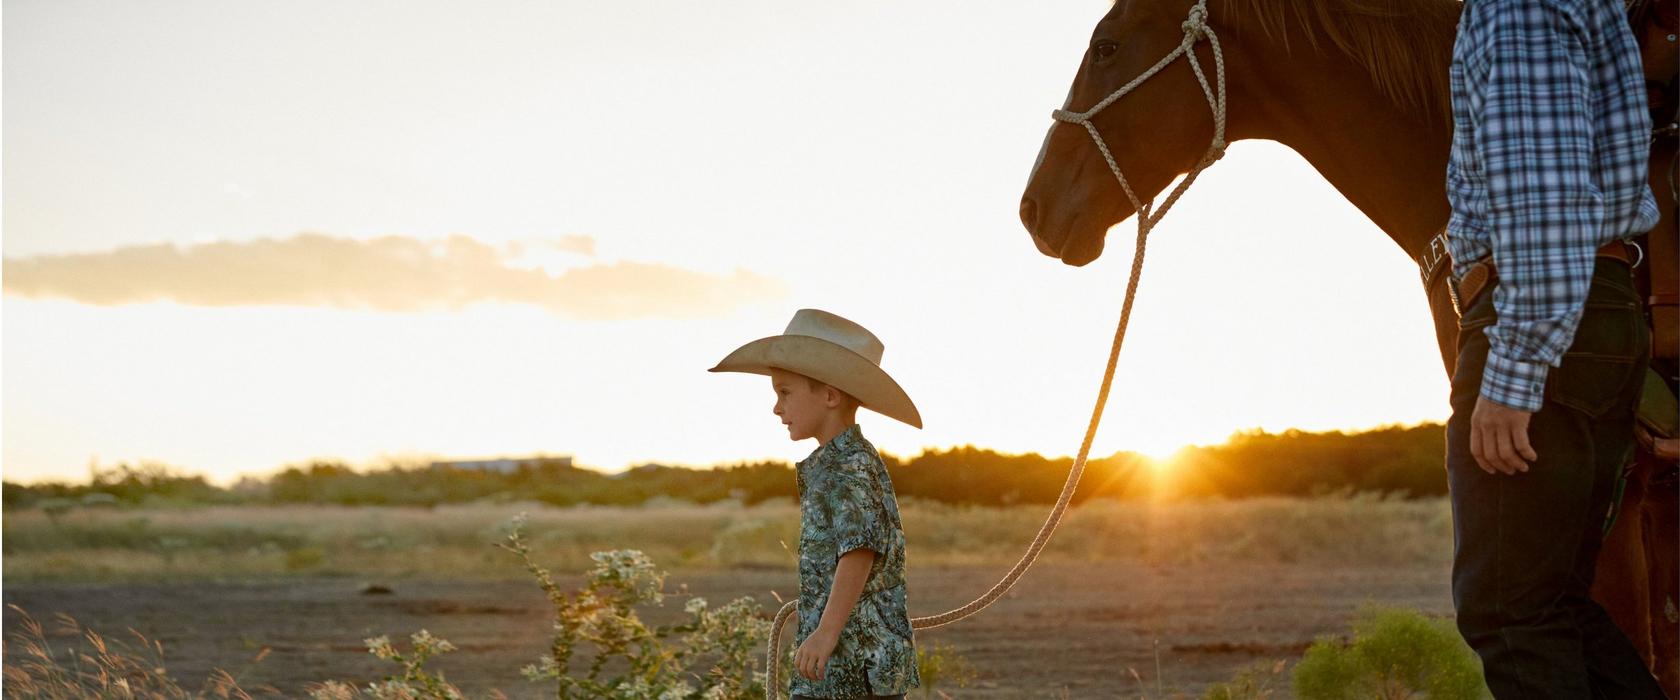 boy walking a horse in front of sunset